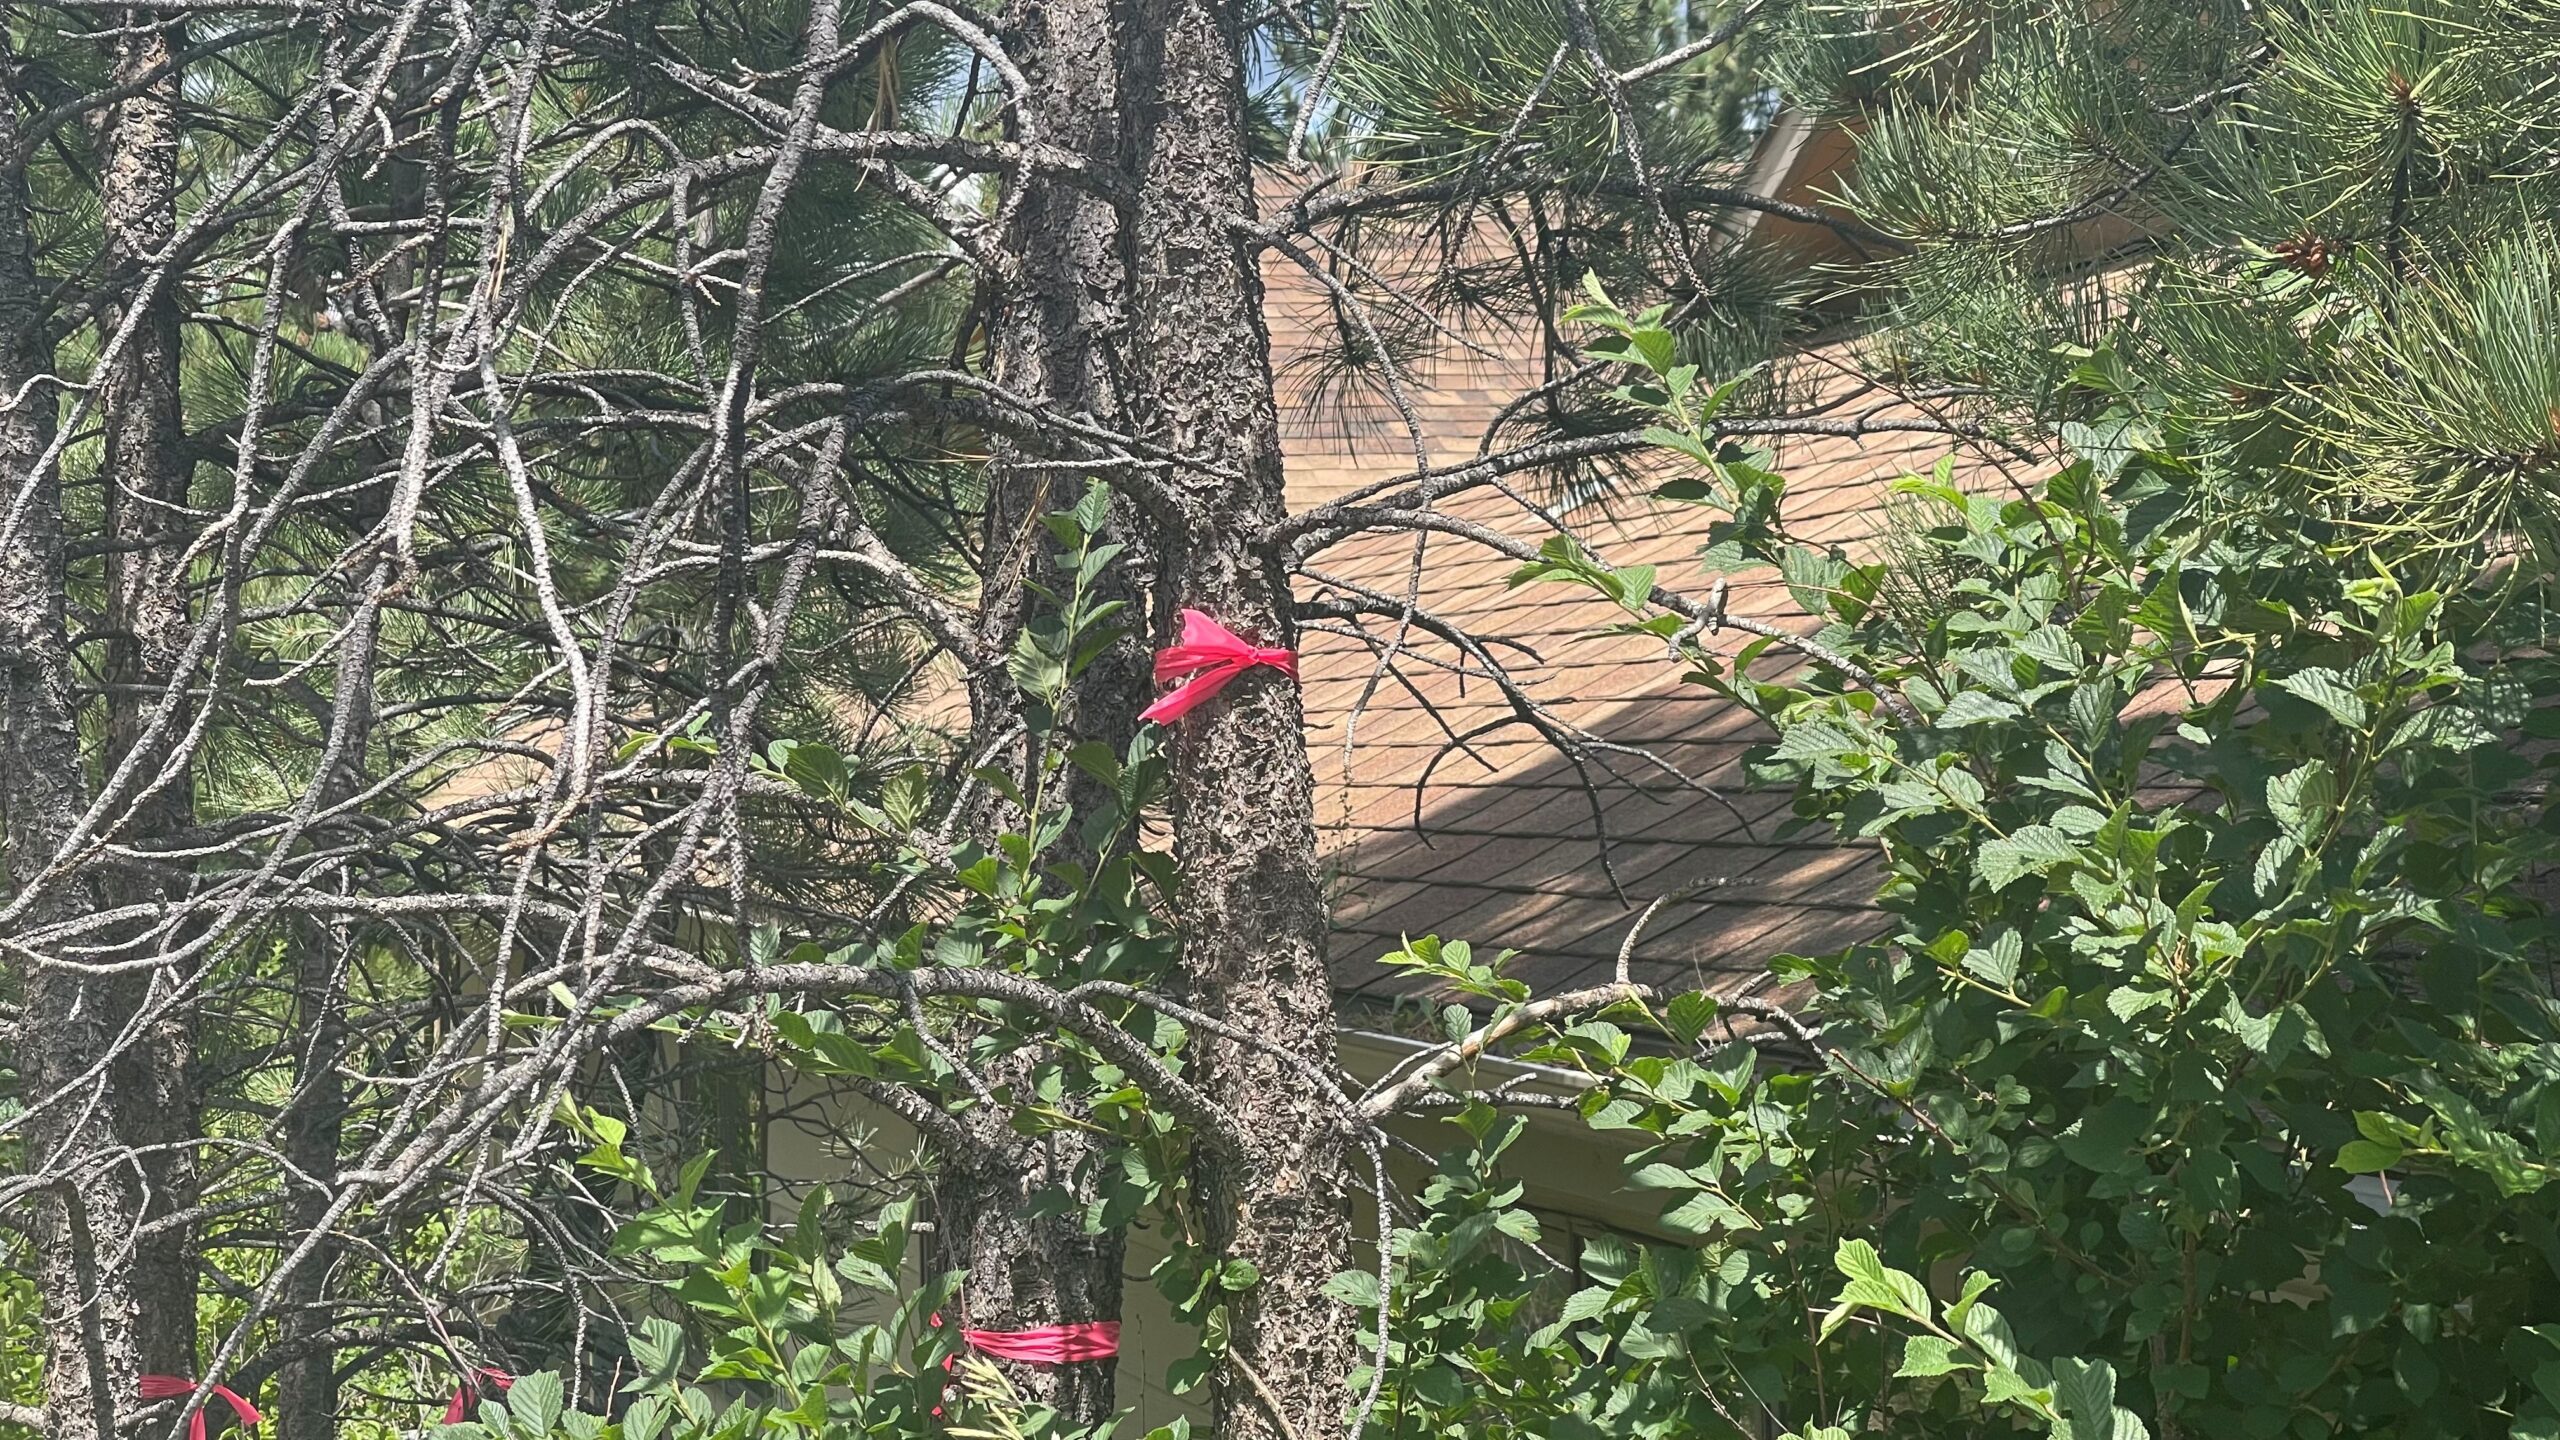 A tree with pink ribbons tied around its trunk and branches, set against a background of green foliage and a house with a brown roof.